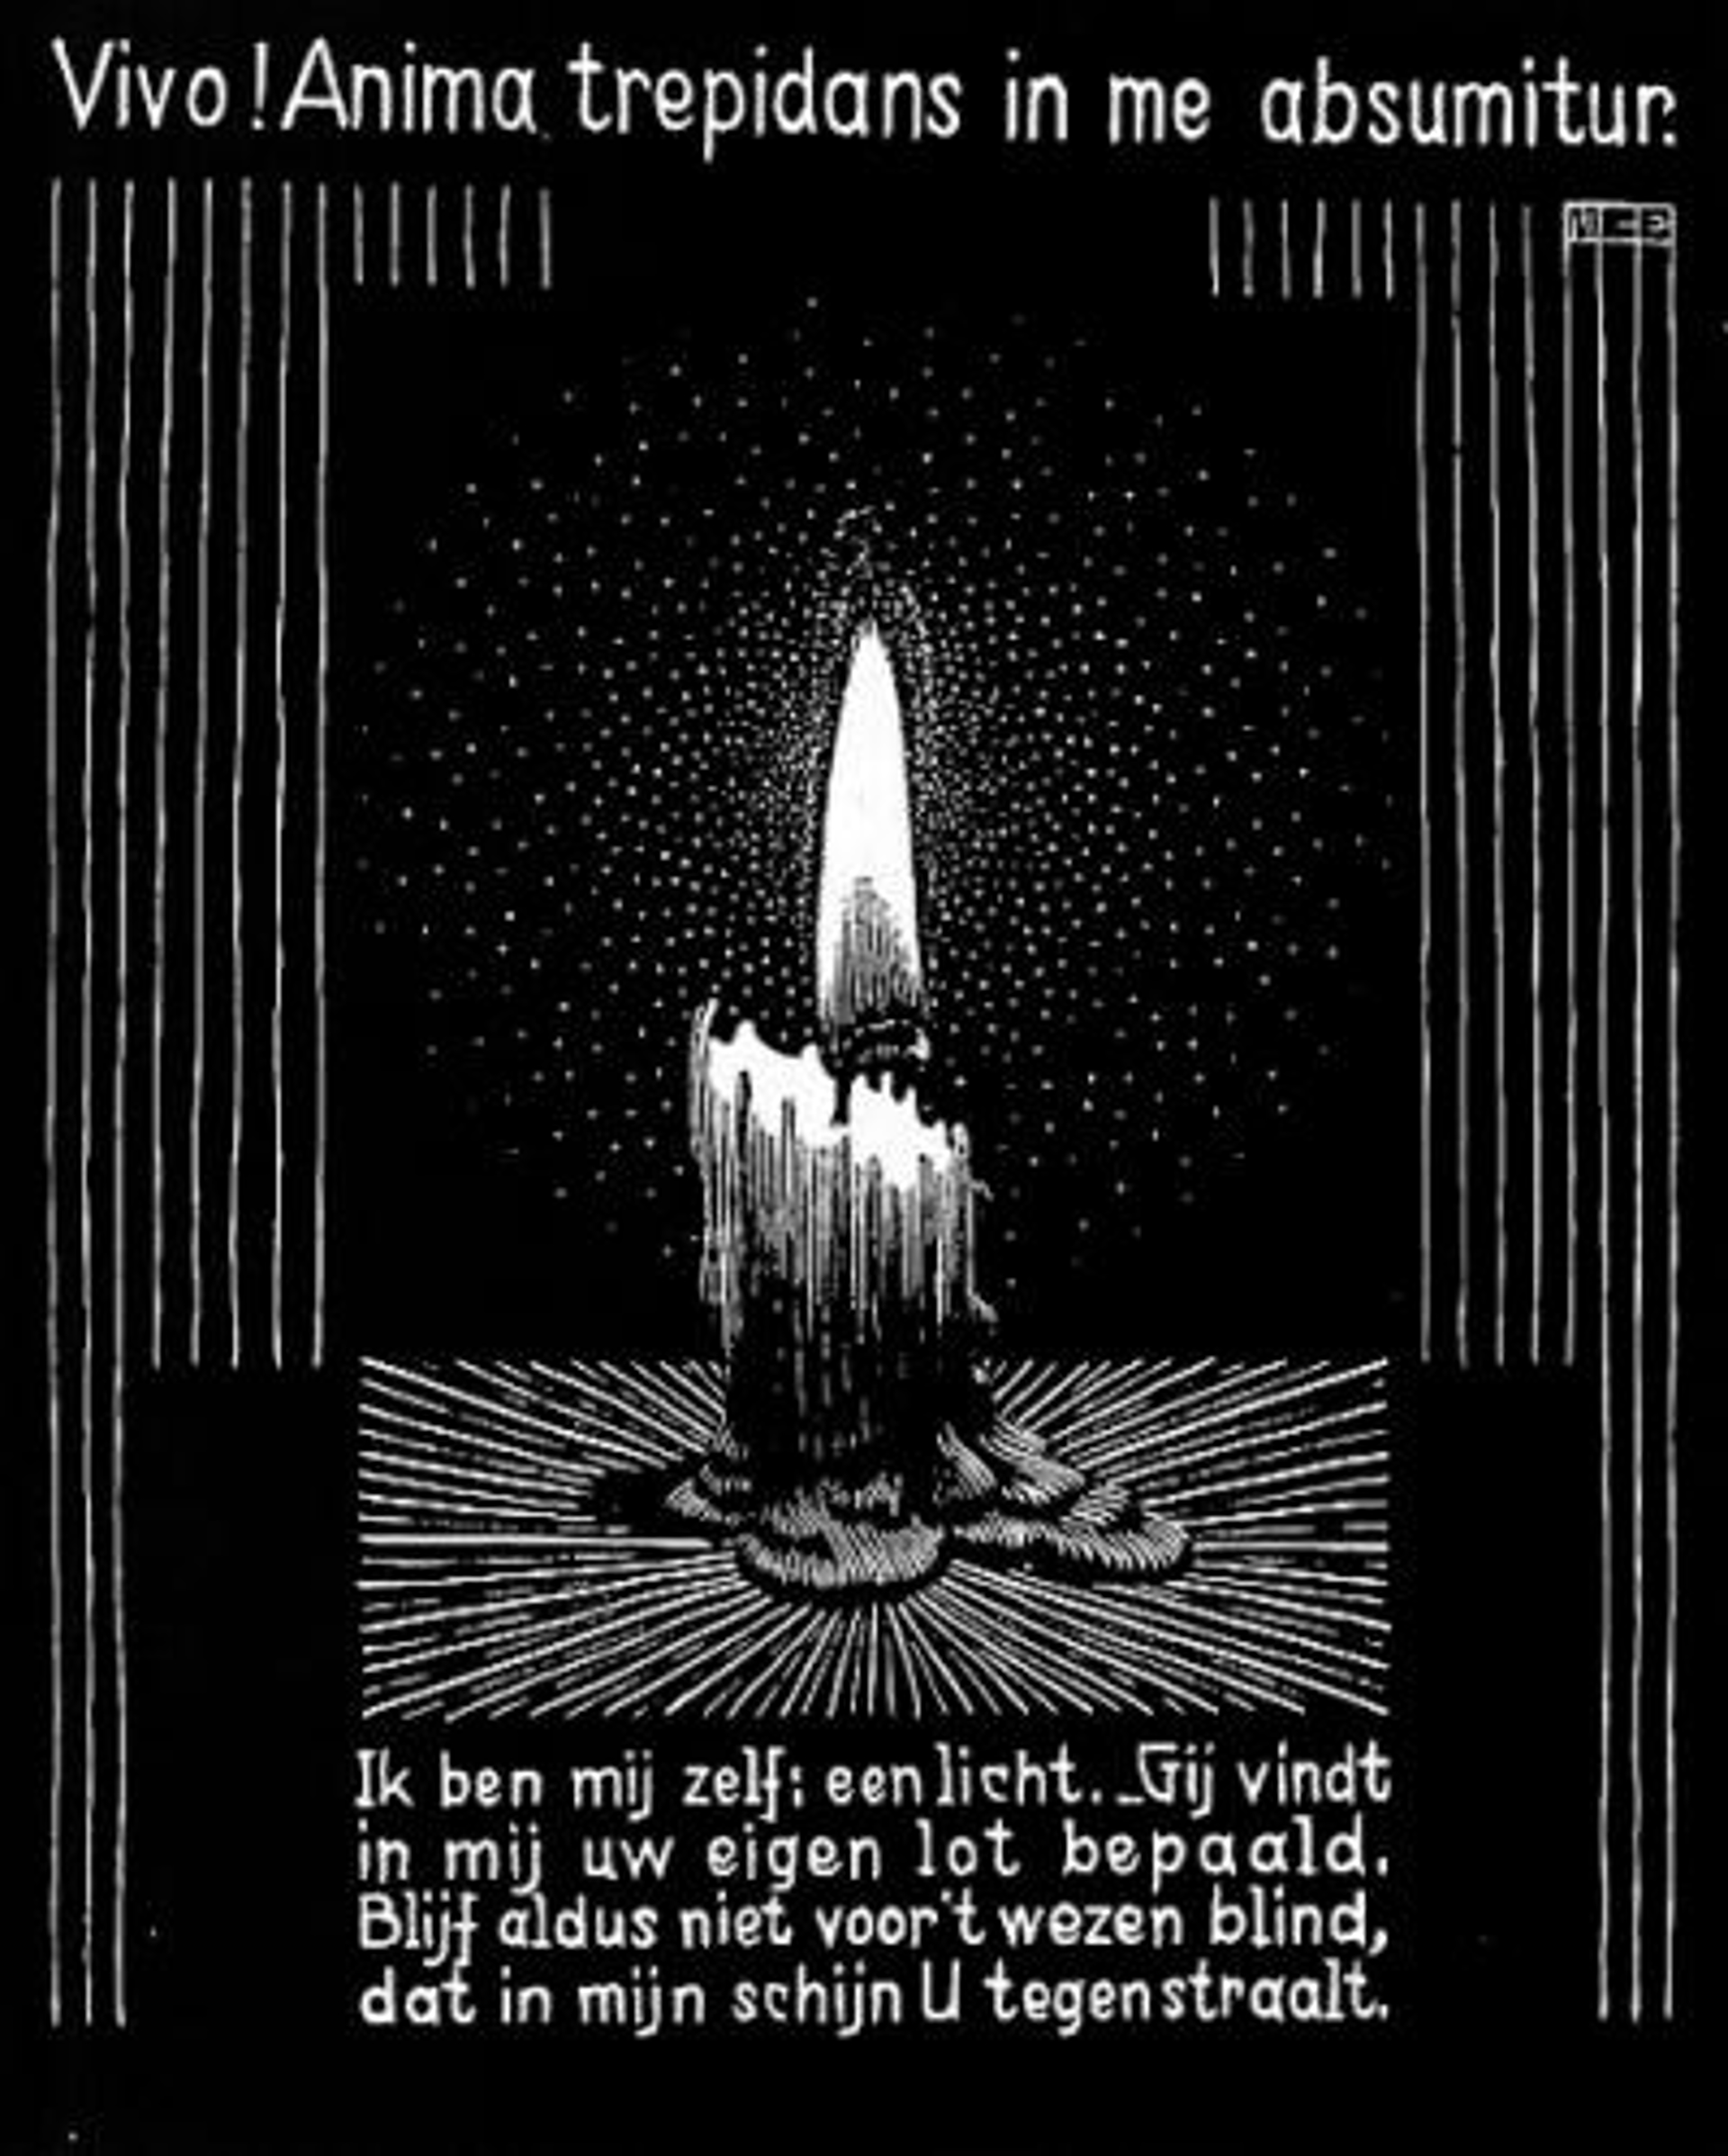 Emblemata - Candle Flame by M.C. Escher